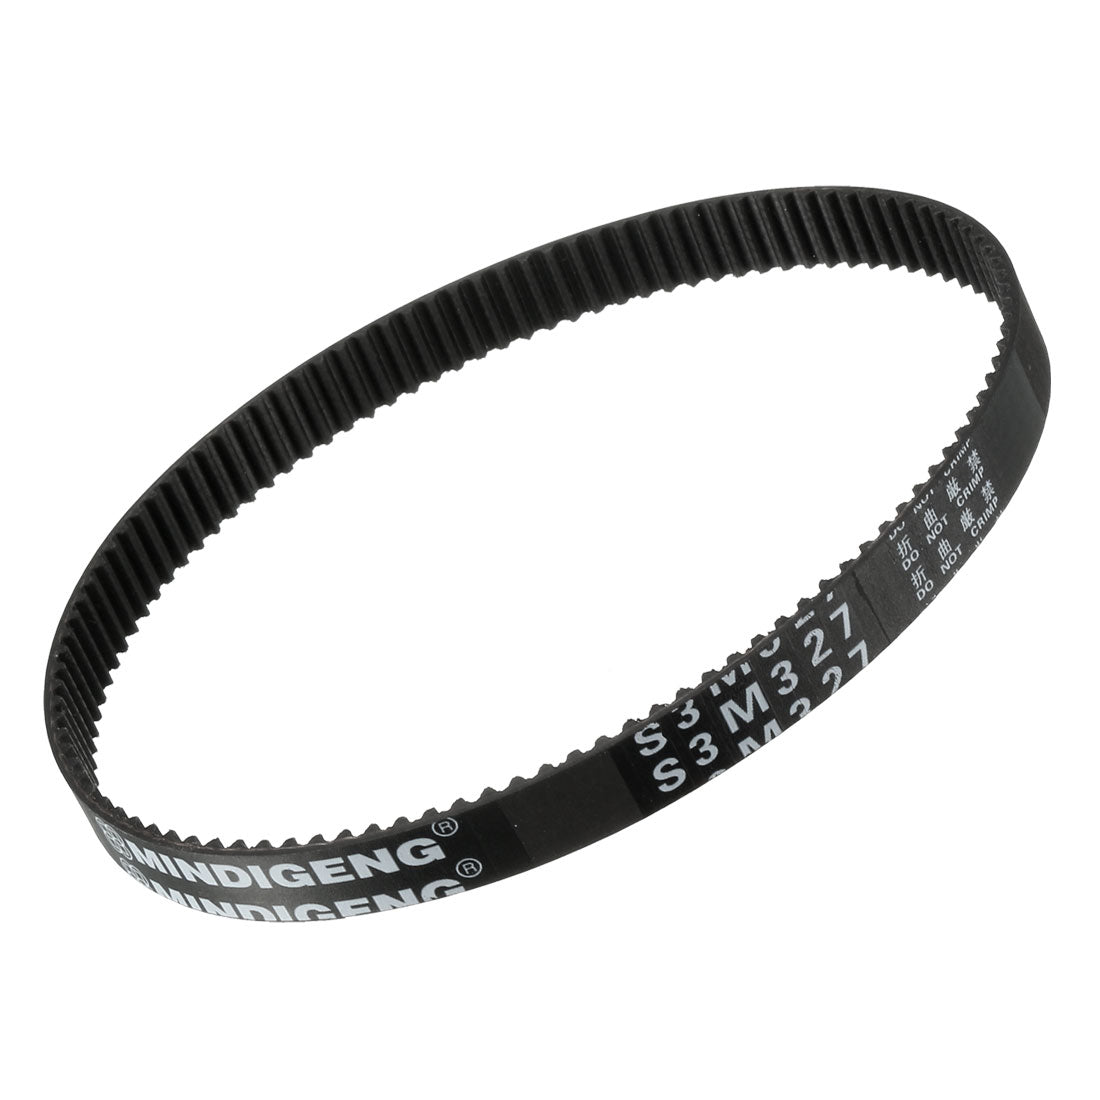 uxcell Uxcell S3M327 Rubber Timing Belt Synchronous Closed Loop Timing Belt Pulleys 10mm Width